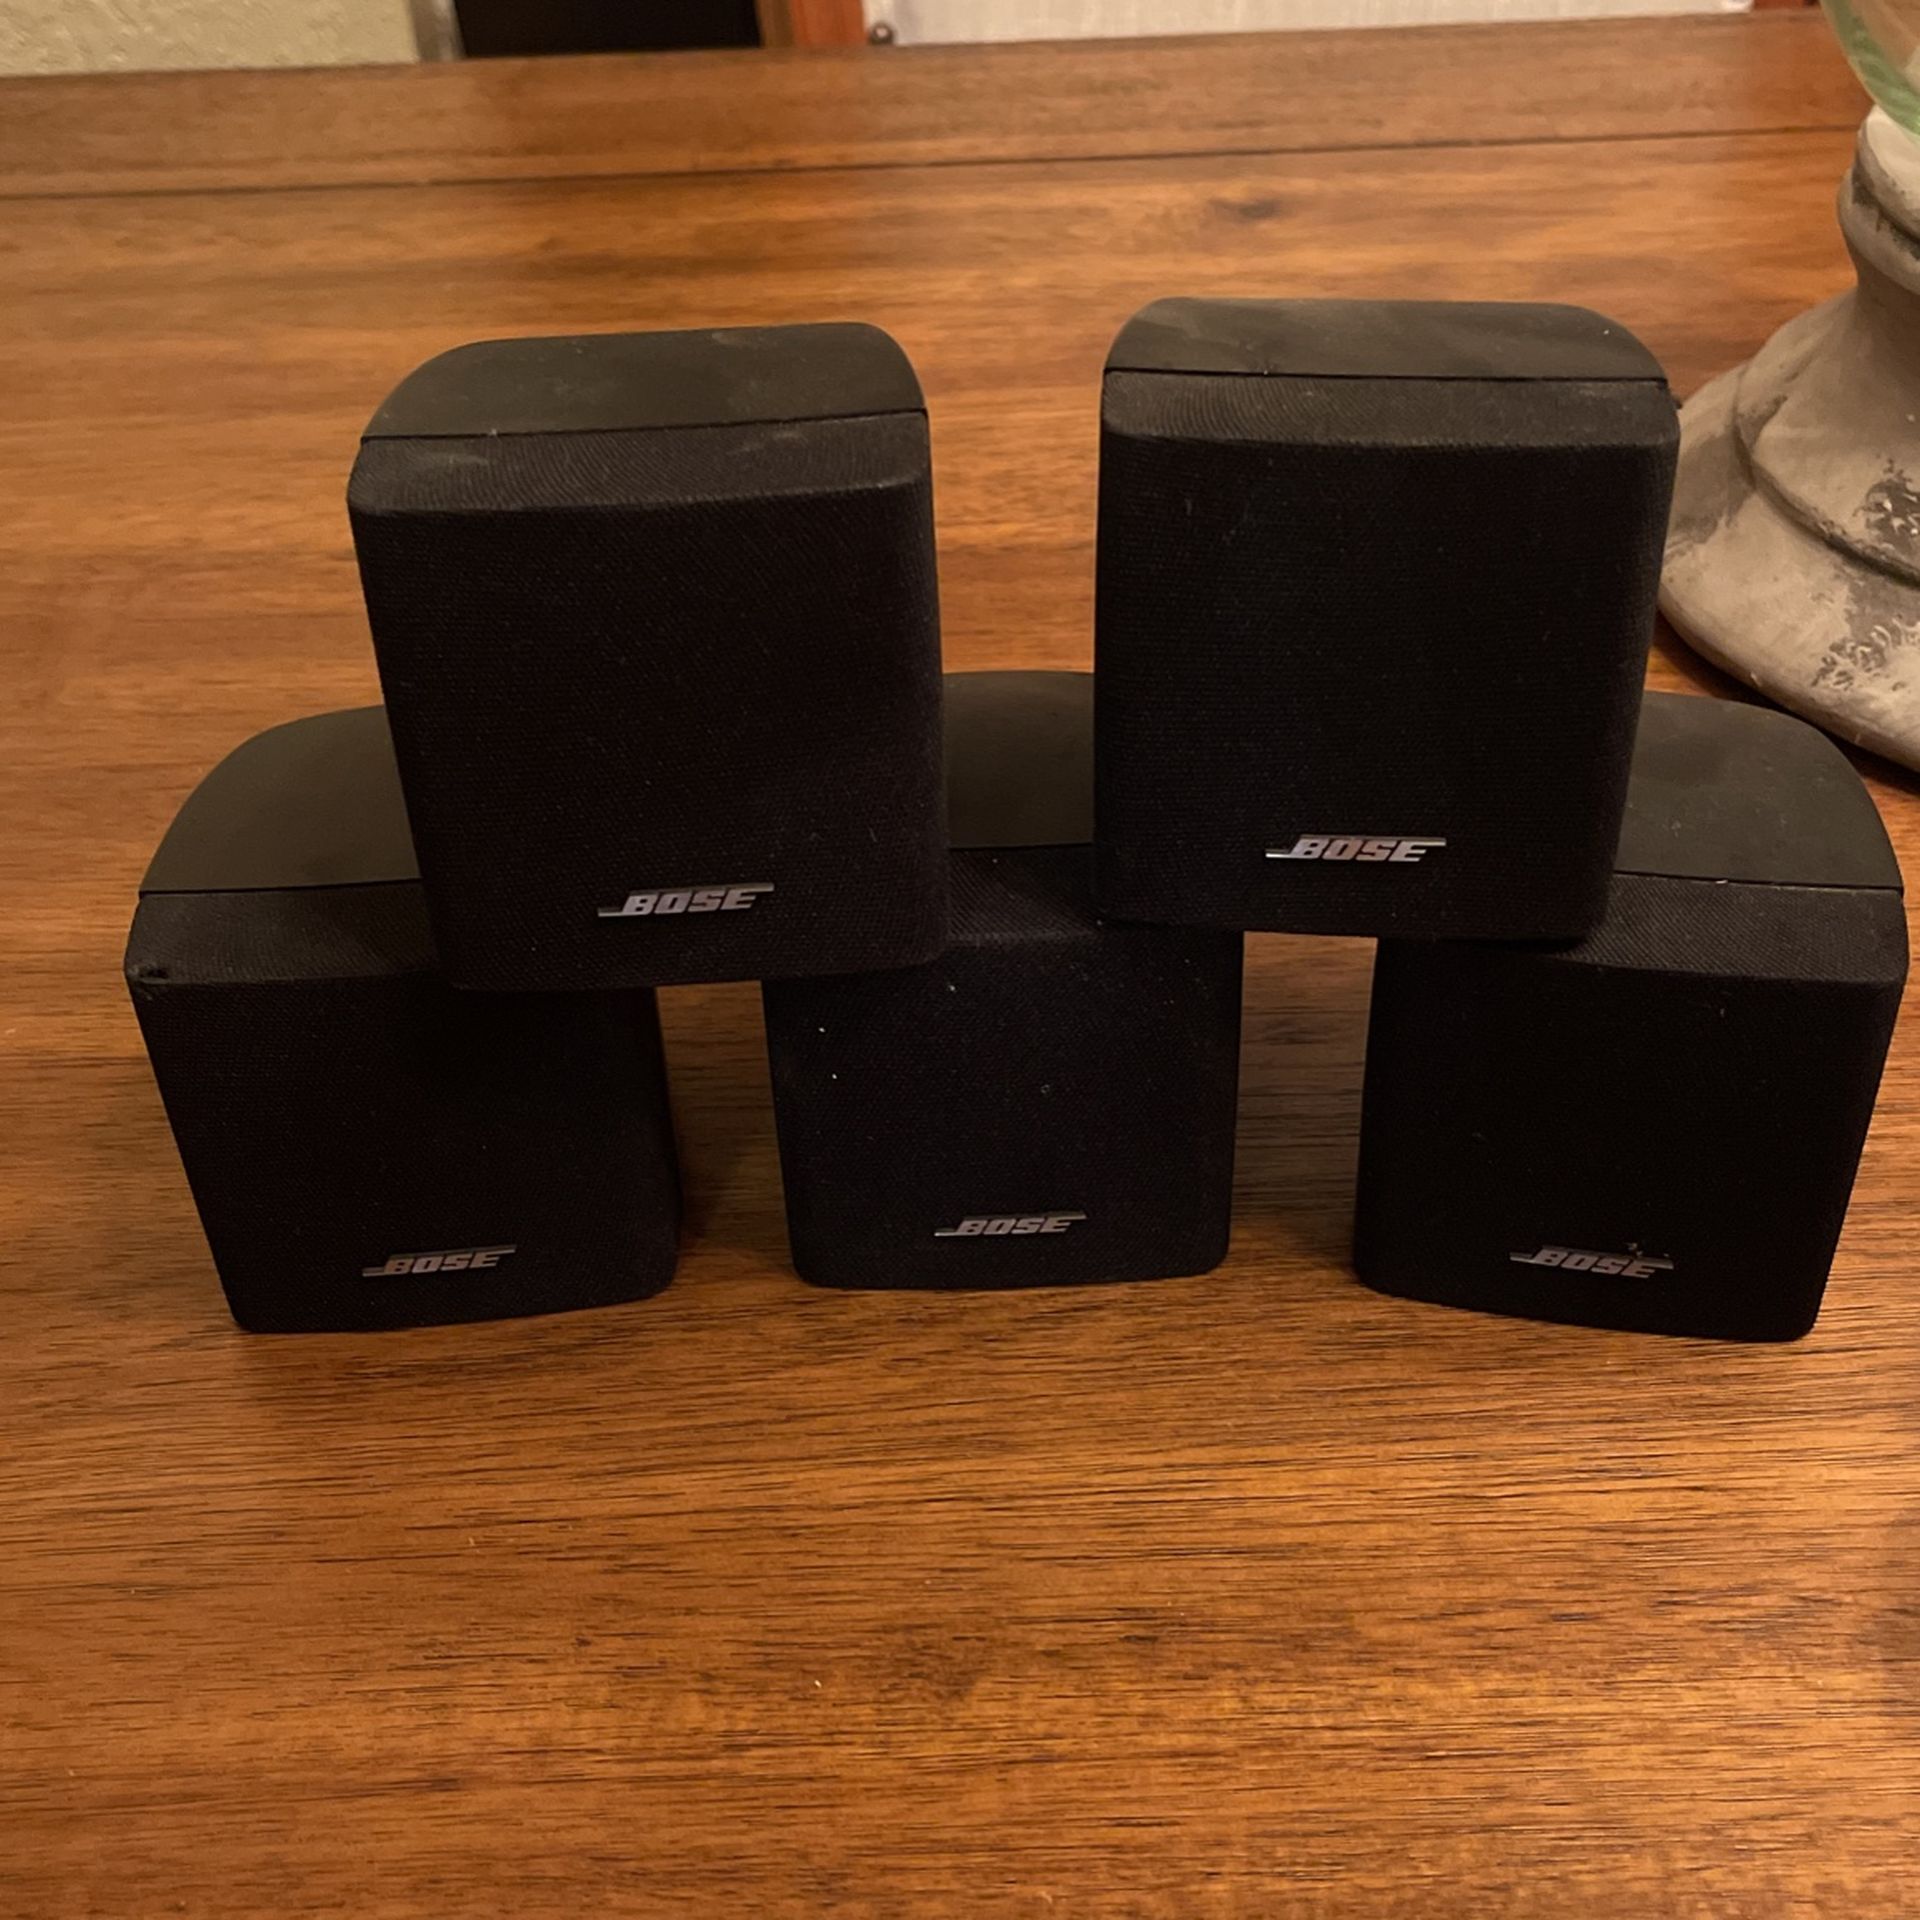 Bose Cubed Speakers With Bose Wires